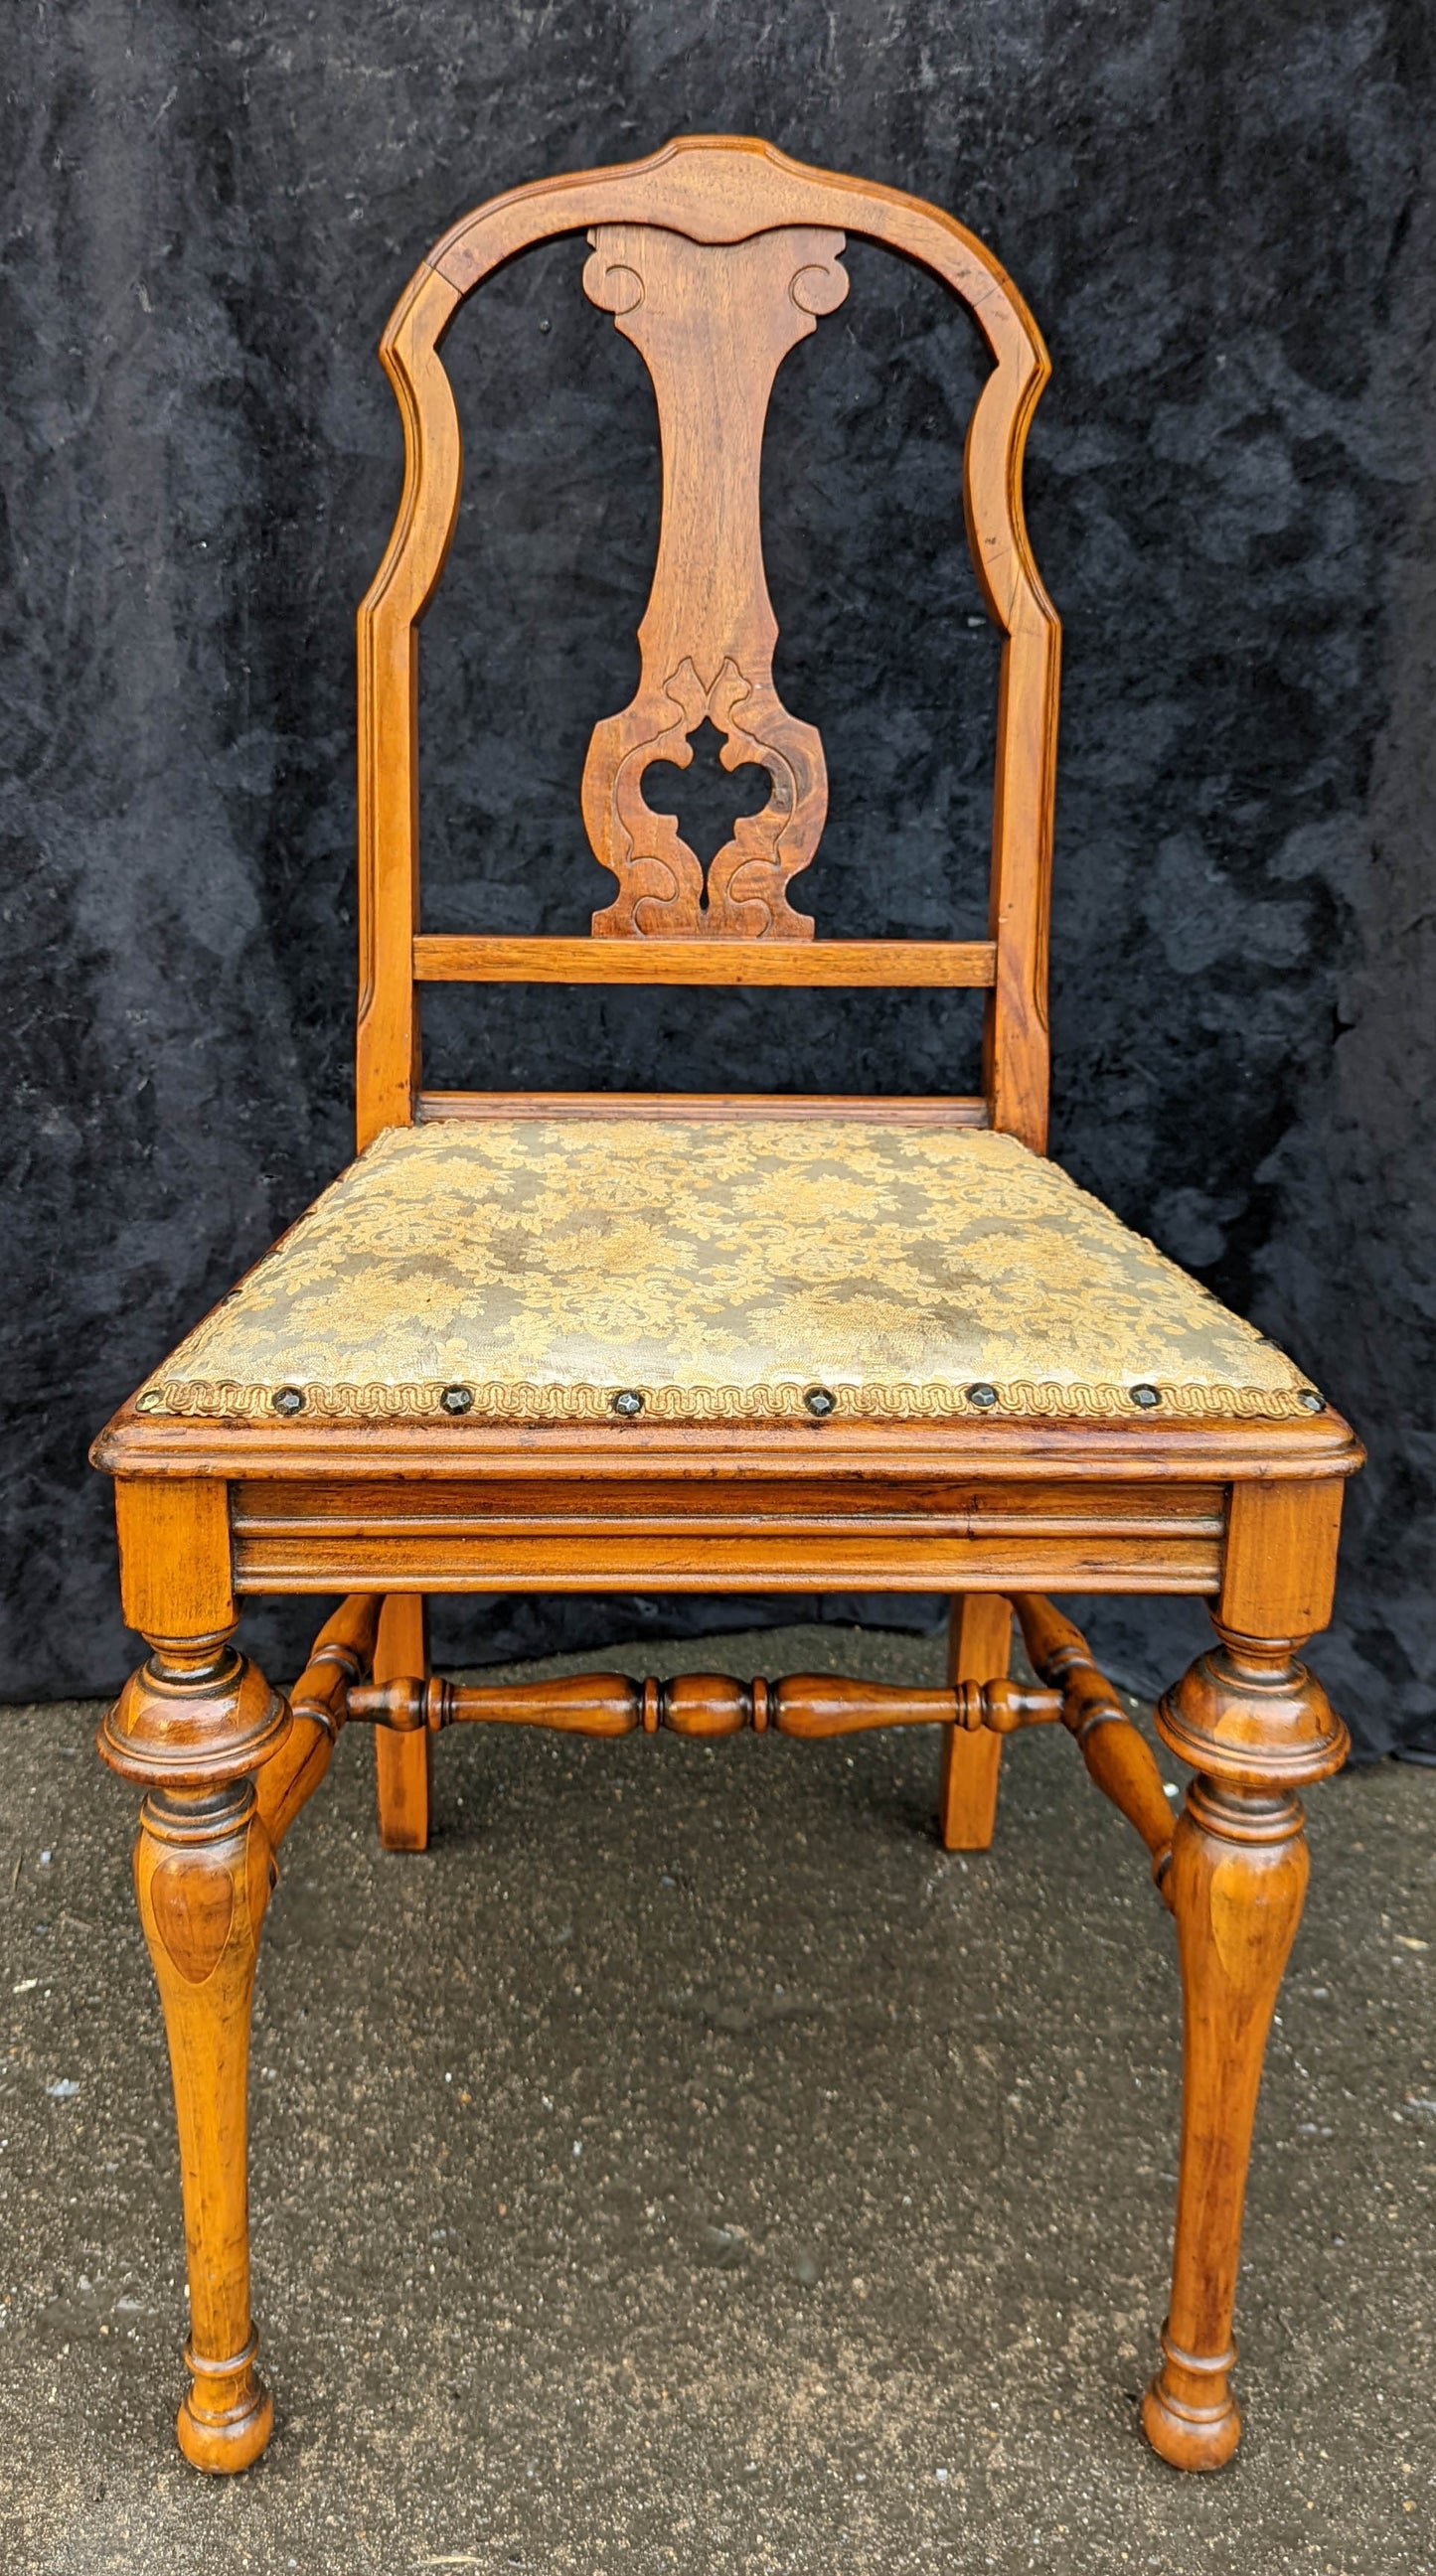 Antique Vintage Old "Rushville" SOLID Walnut Wood Wooden Carved Side Dining Accent Desk Chair Fabric Caned Wicker Seat